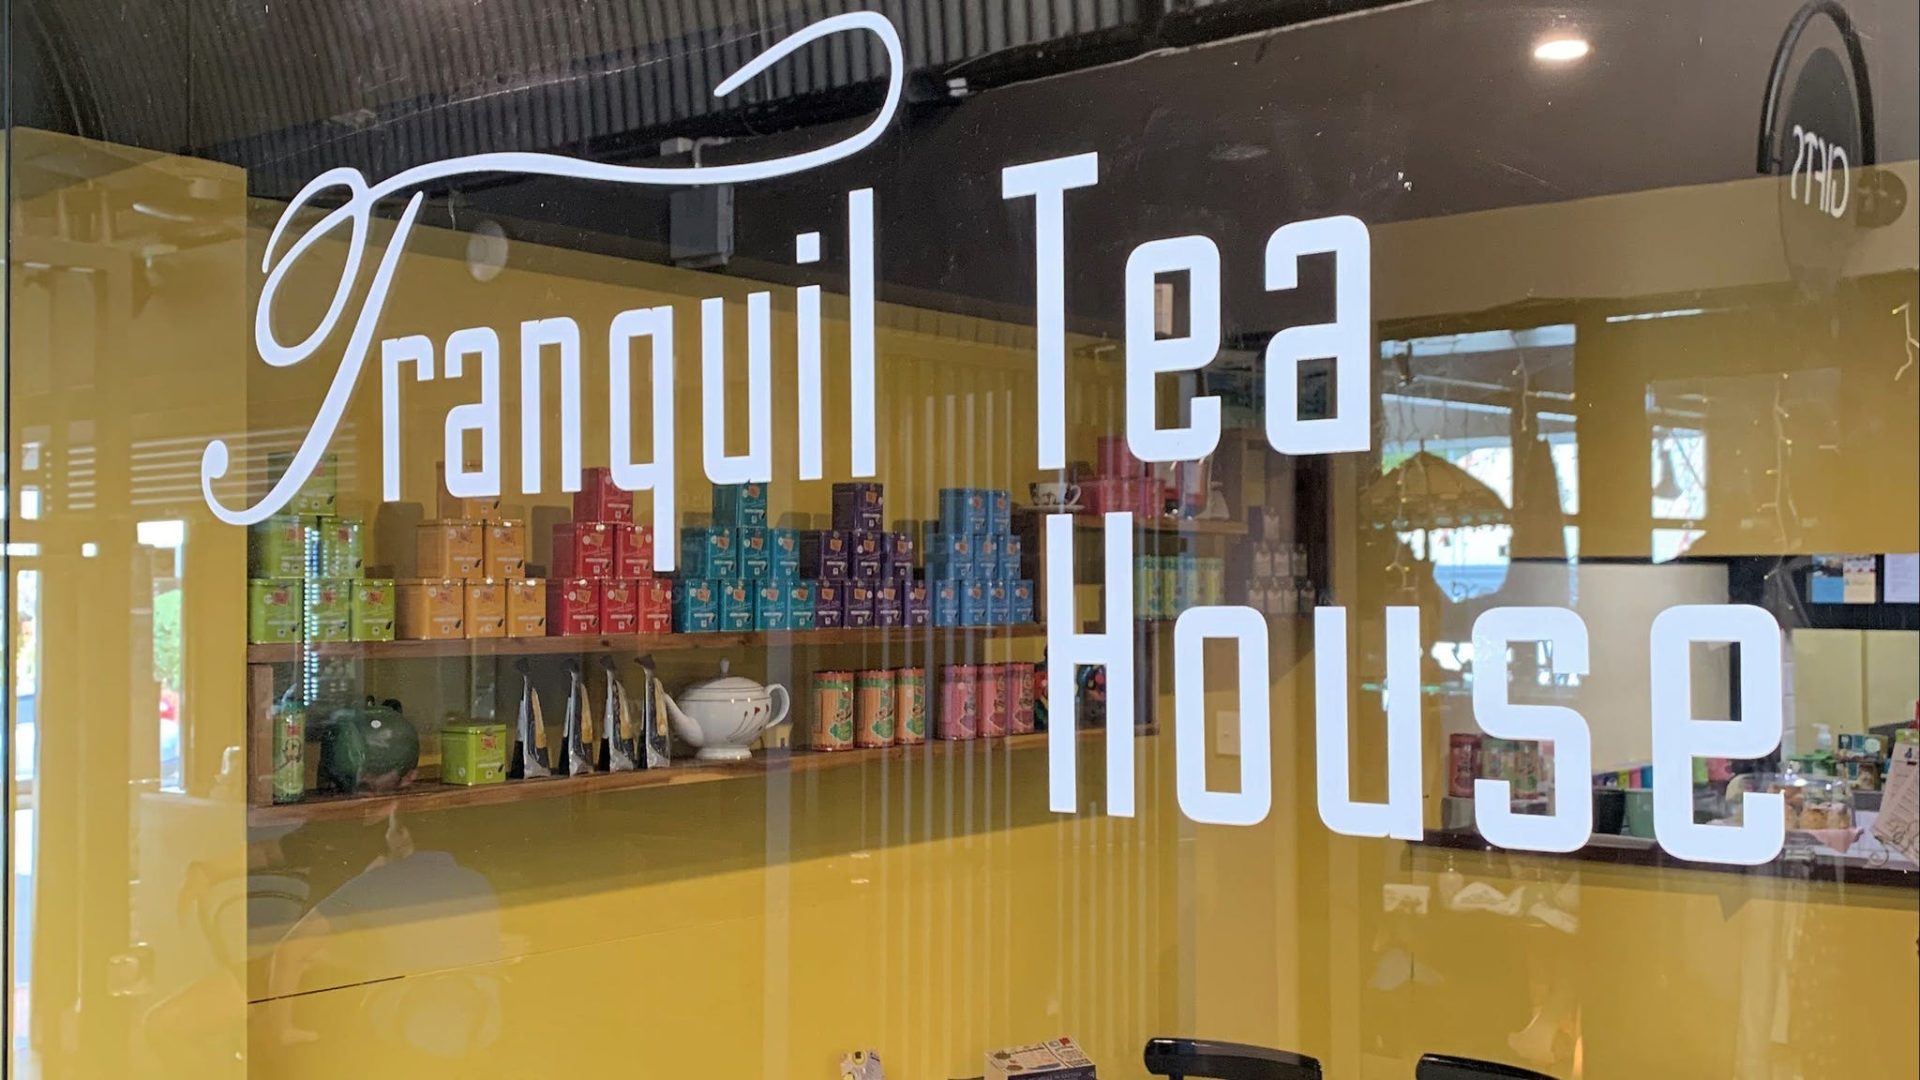 Tranquil Tea House Discover Ipswich